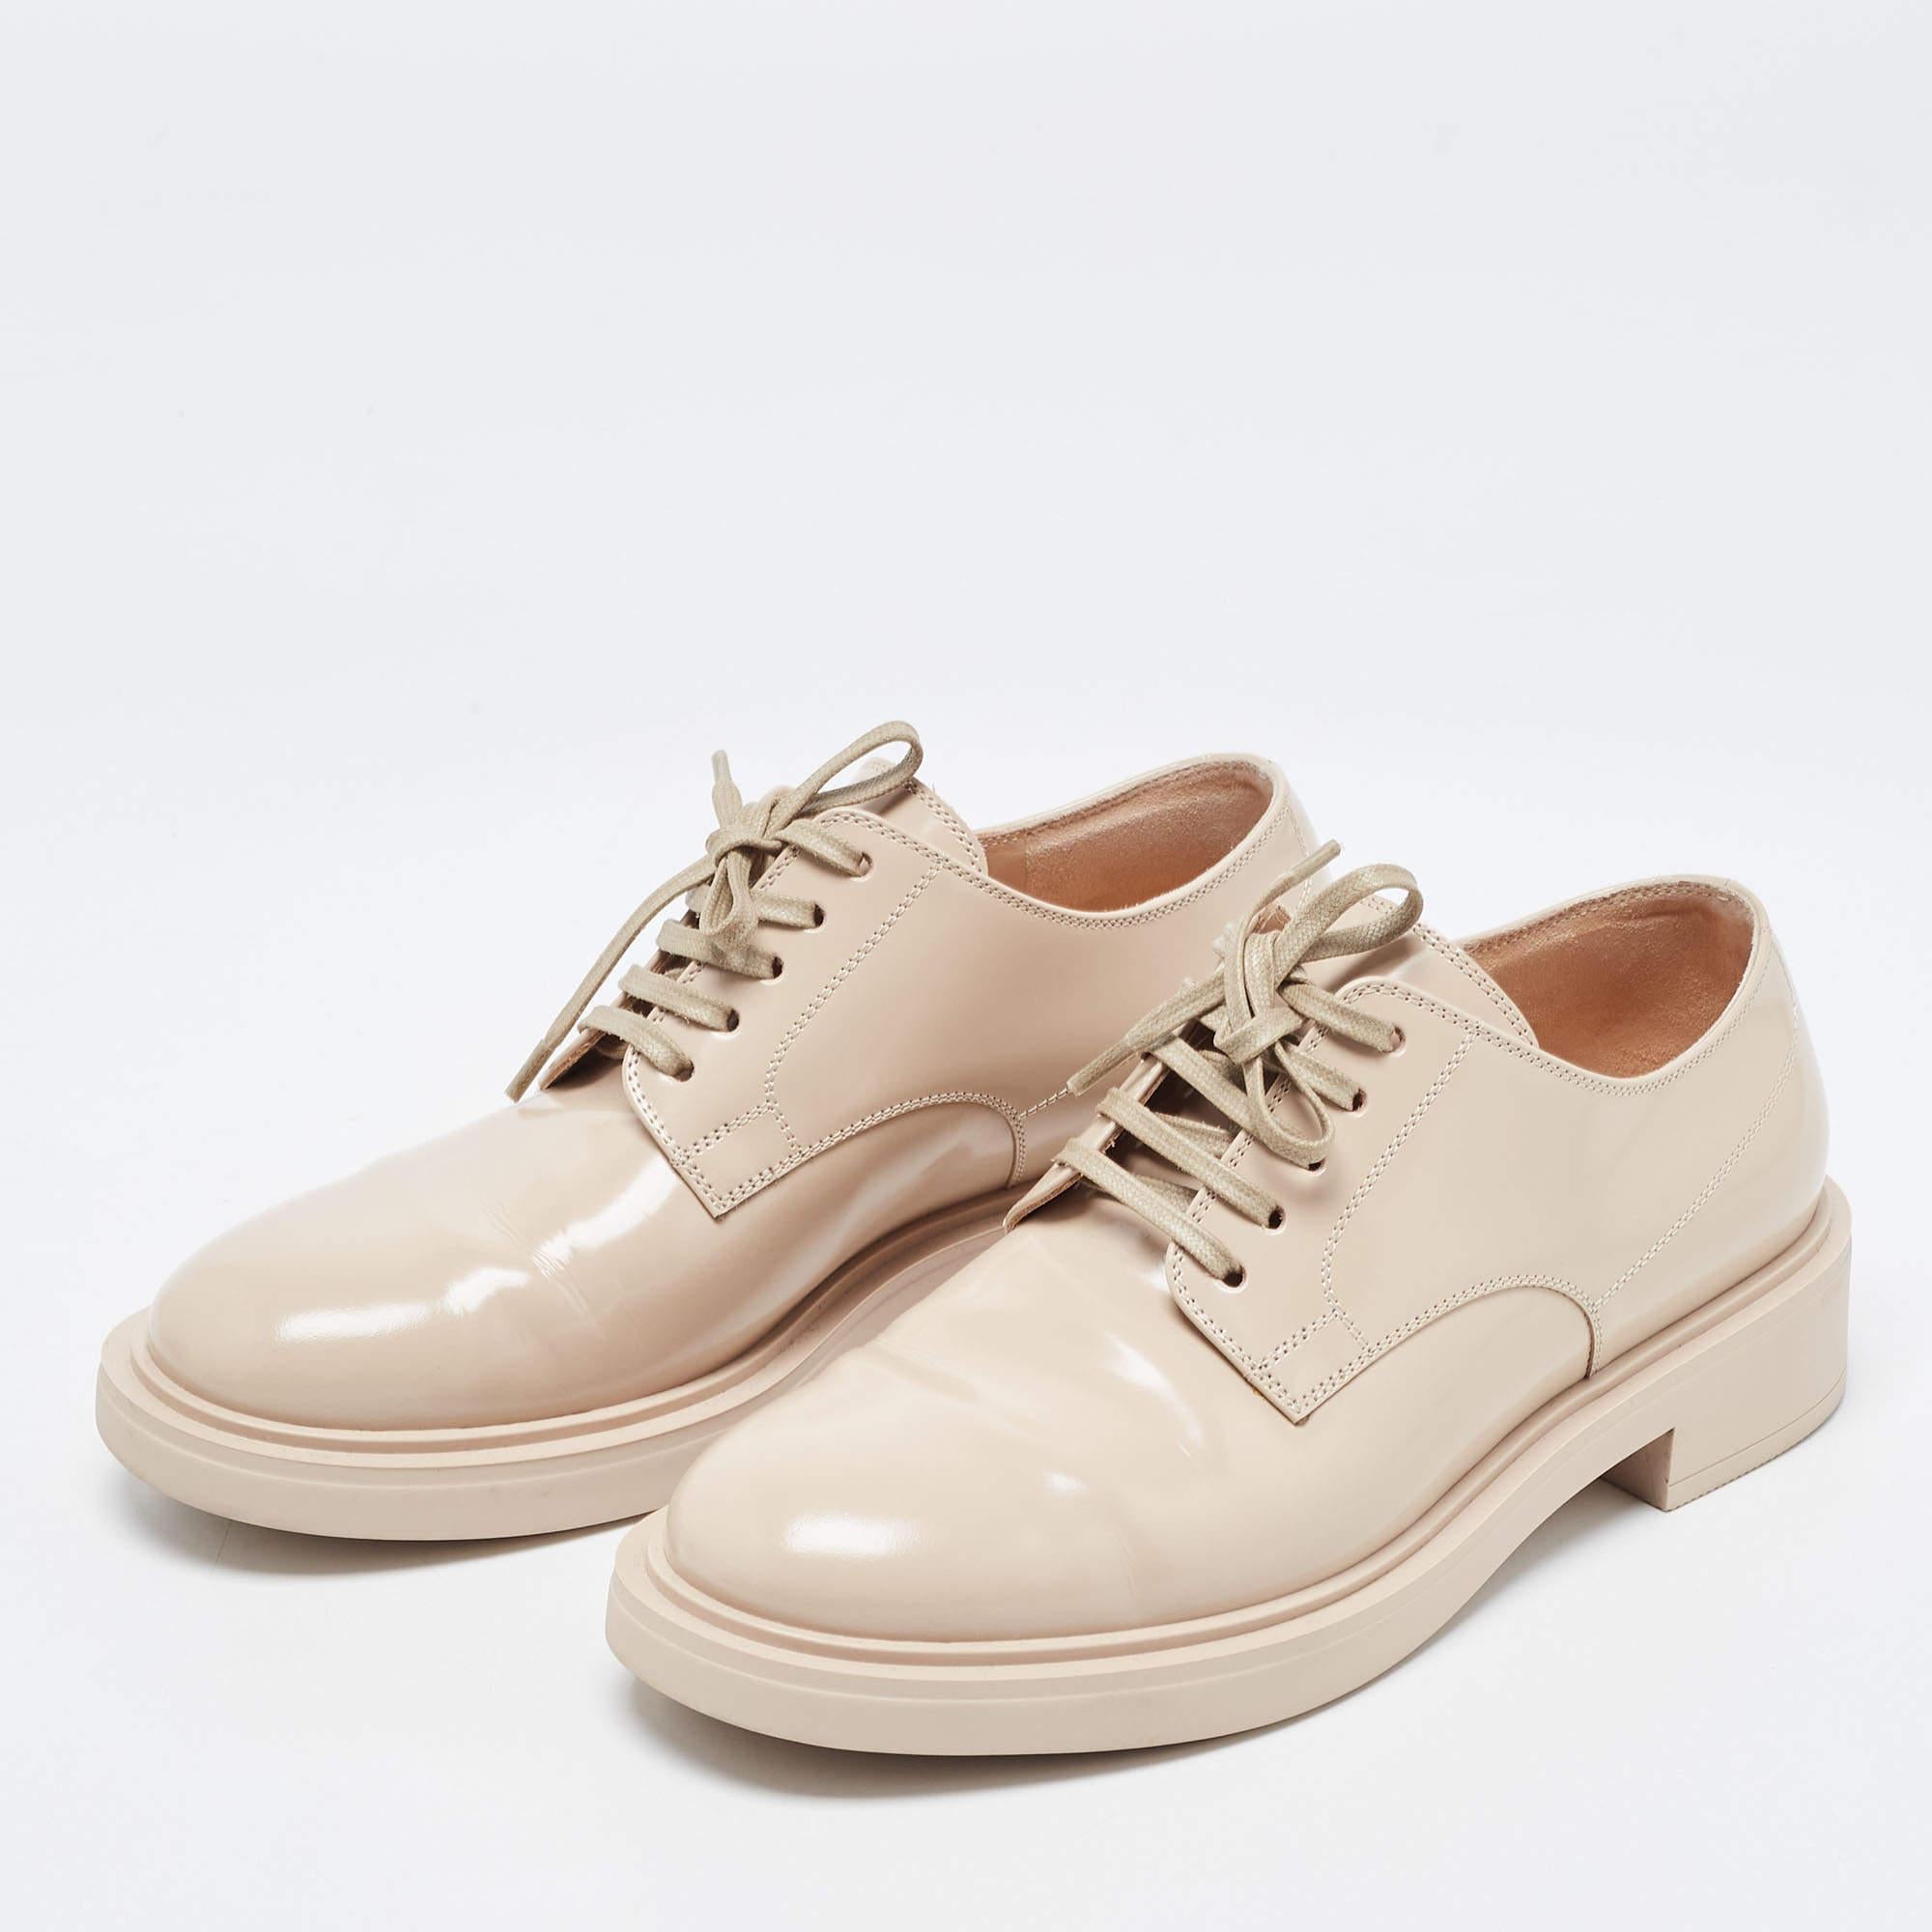 These oxfords are designed from the finest material featuring an elegant look, sturdy soles, and lace-ups on the vamps. Team these shoes with tailored pants and a blazer for a smart formal look.

Includes: Original Dustbag, Original Box